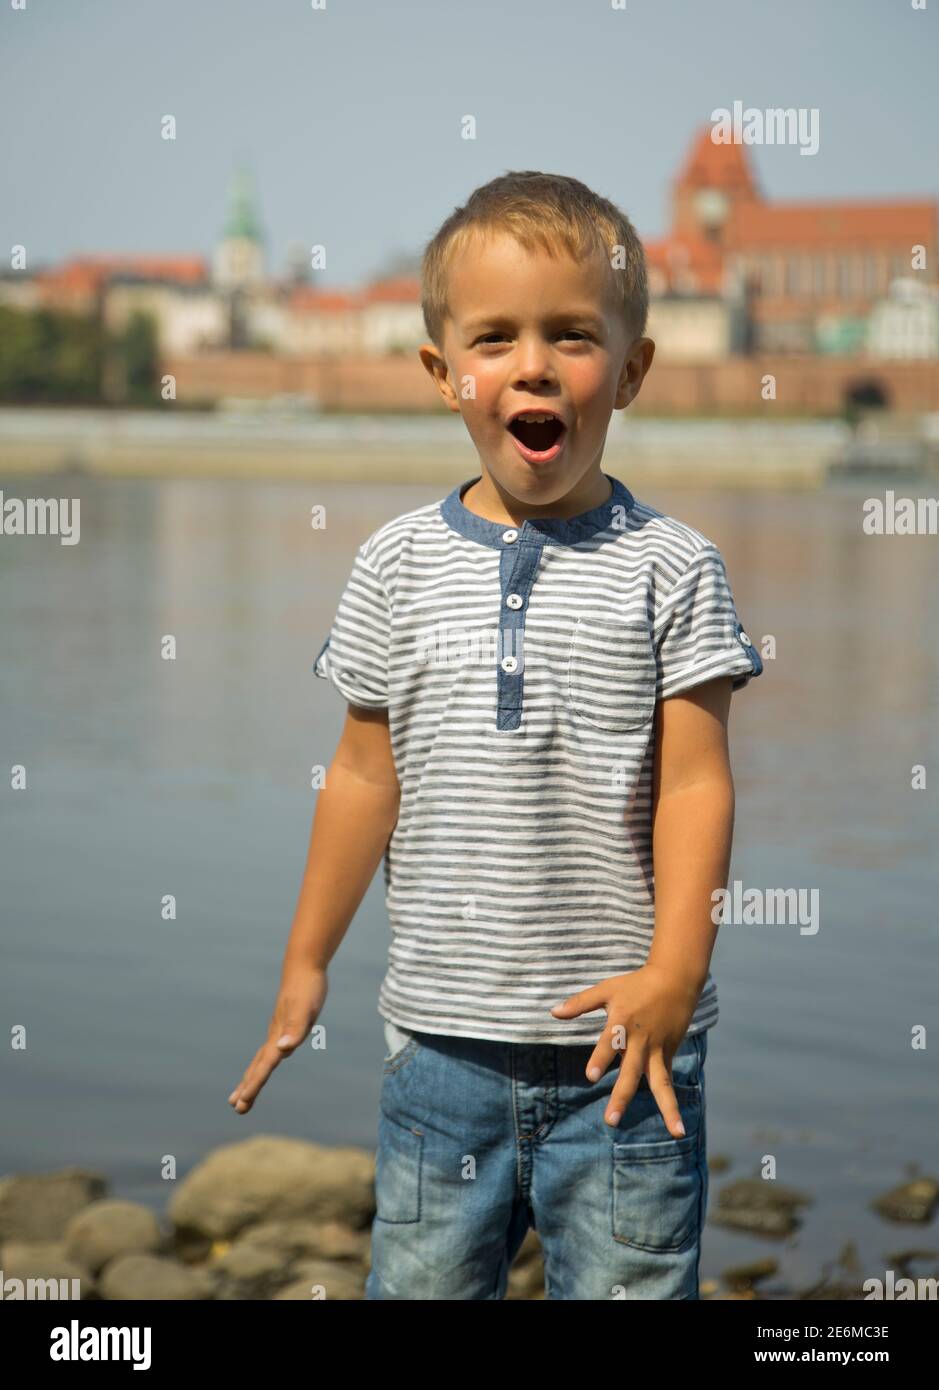 Torun Child High Resolution Stock Photography and Images - Alamy